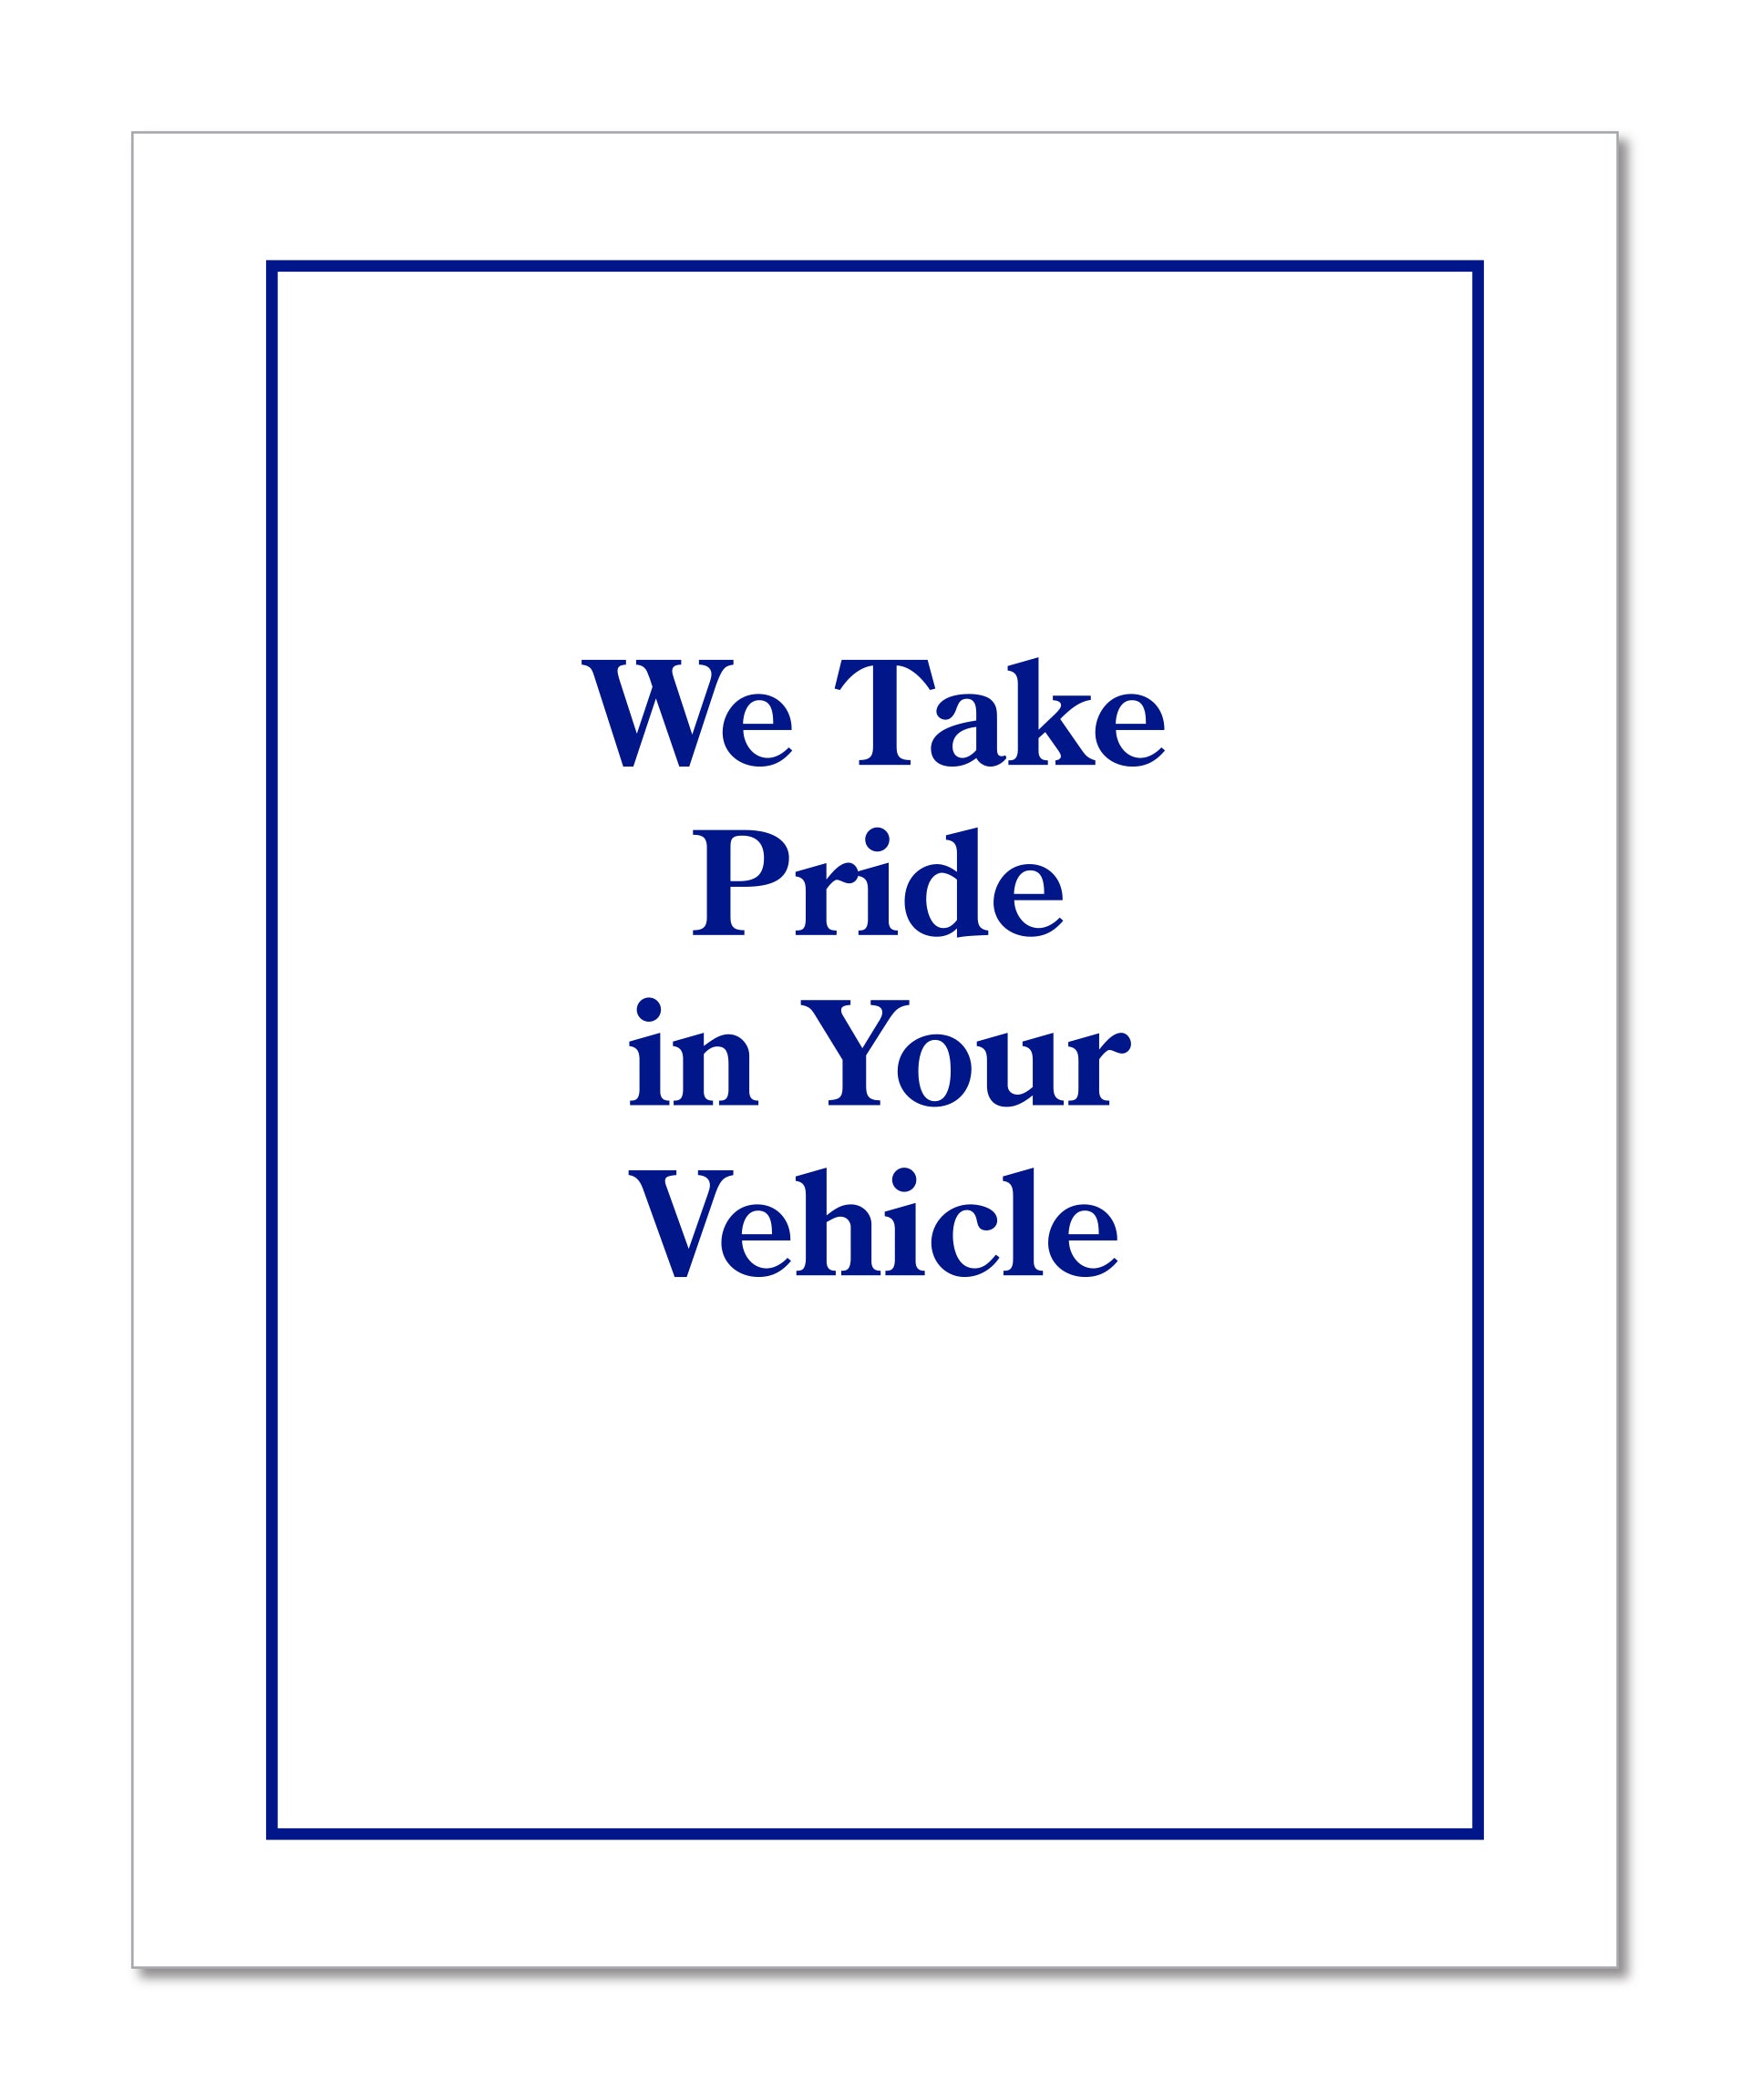 Picture is a white floor mat with a blue outline with blue words in the middle that say "we take pride in your vehicle"